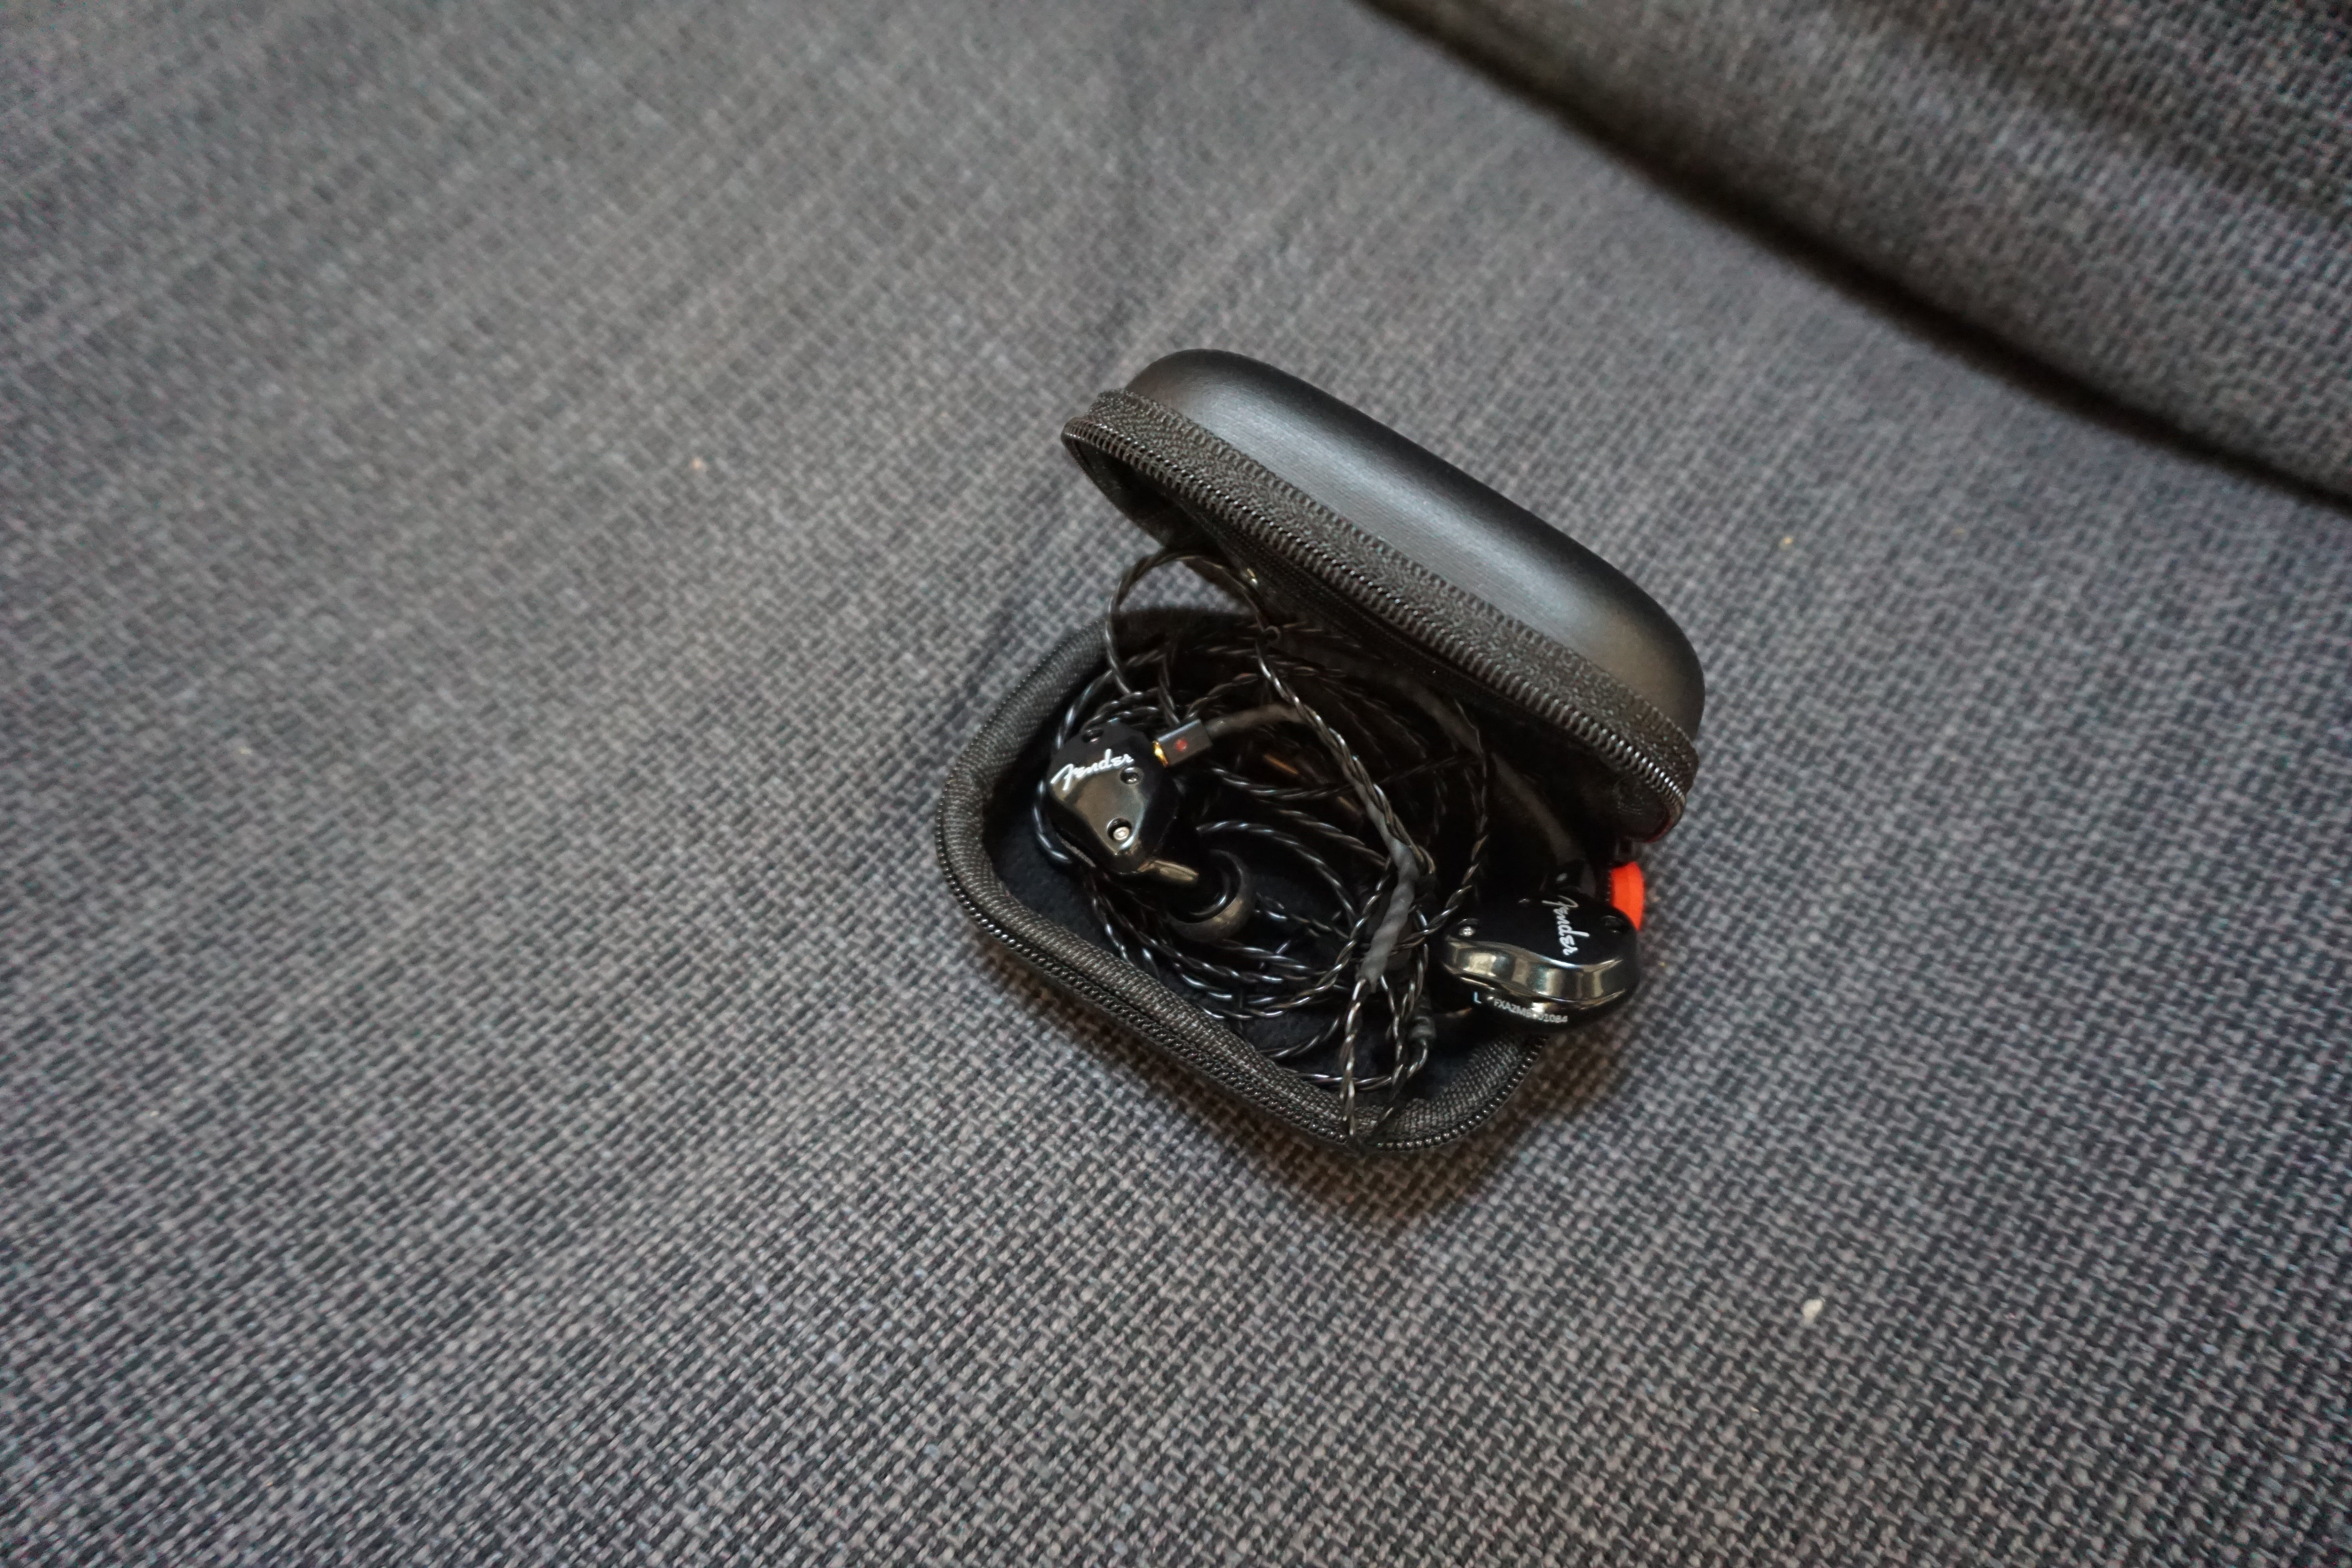 Fender FXA2 in-ear monitors with carrying case on fabric surface.